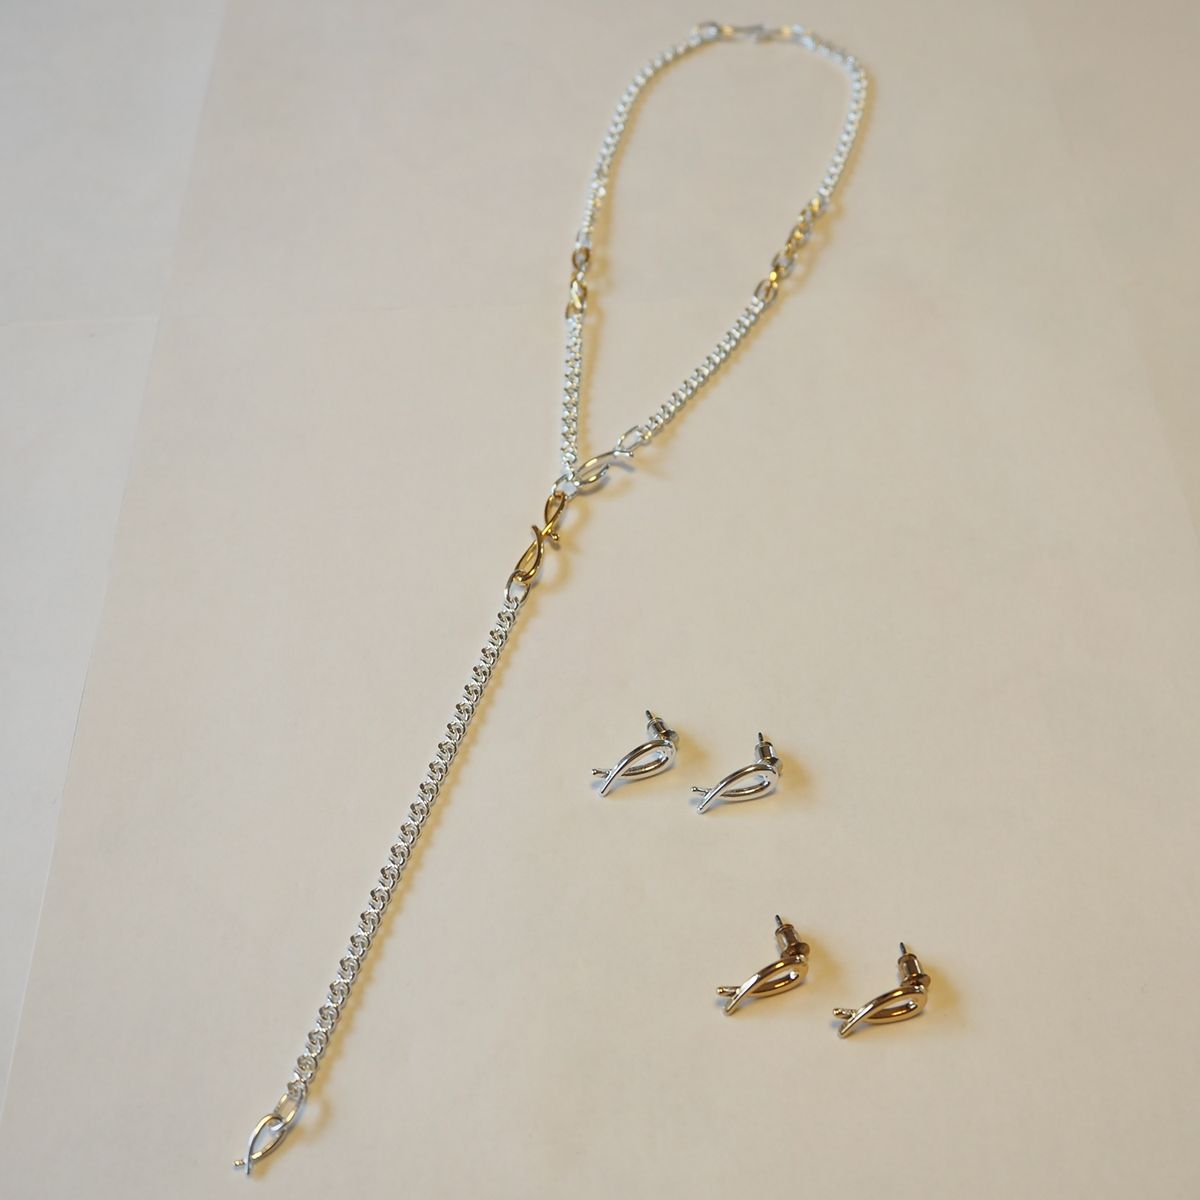 TurningMotif Chain Necklace | Nothing And Others | 服飾雑貨